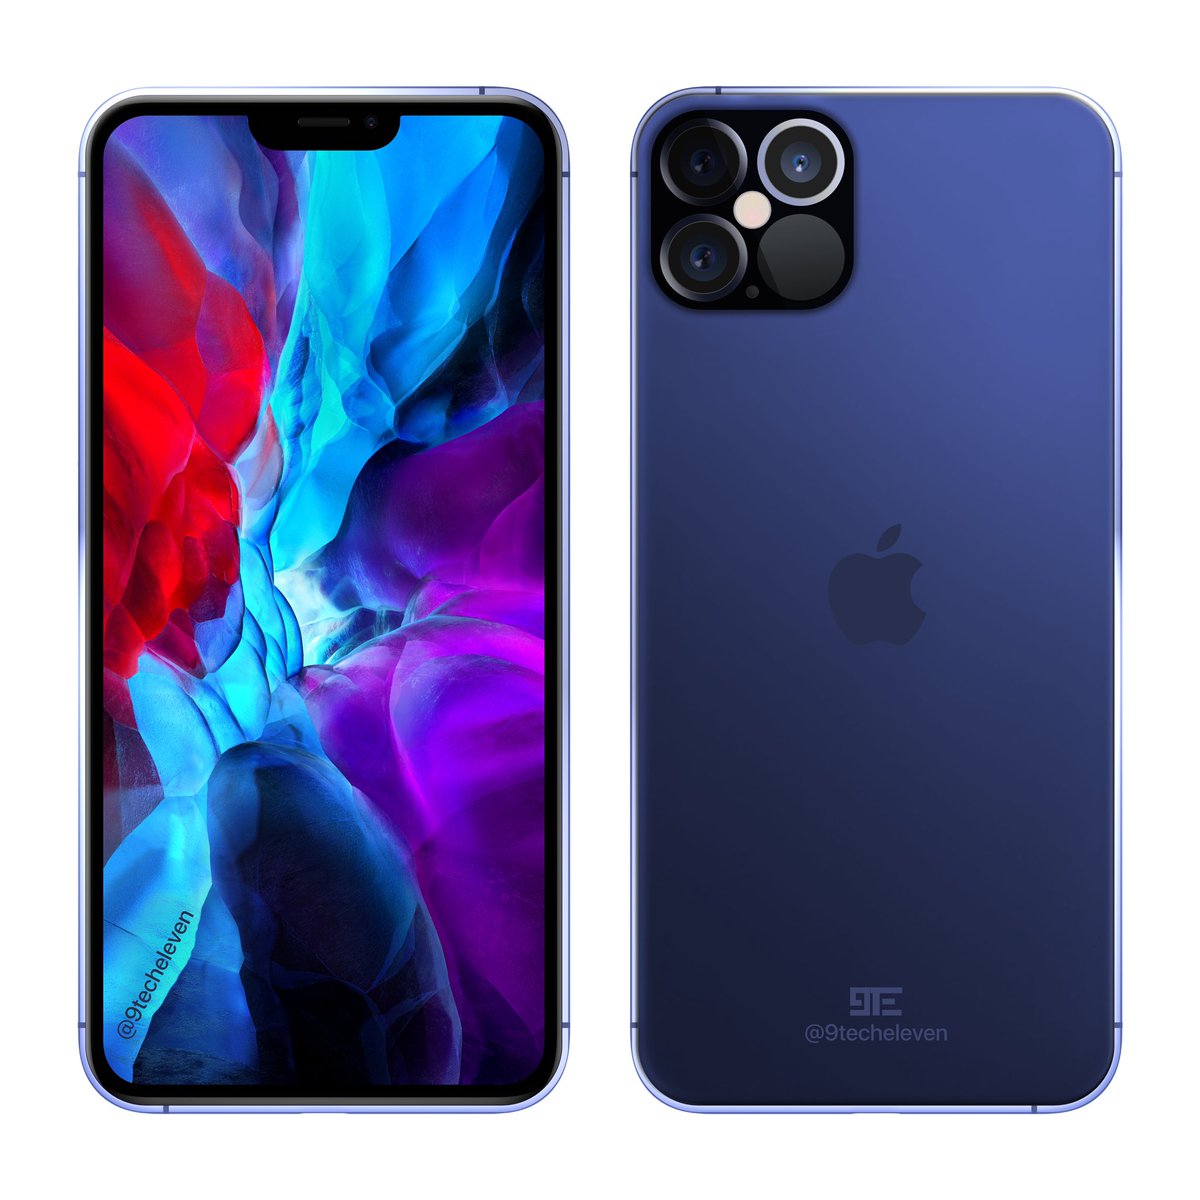 9techeleven On Twitter Iphone 12 Pro Concept Design In Midnight